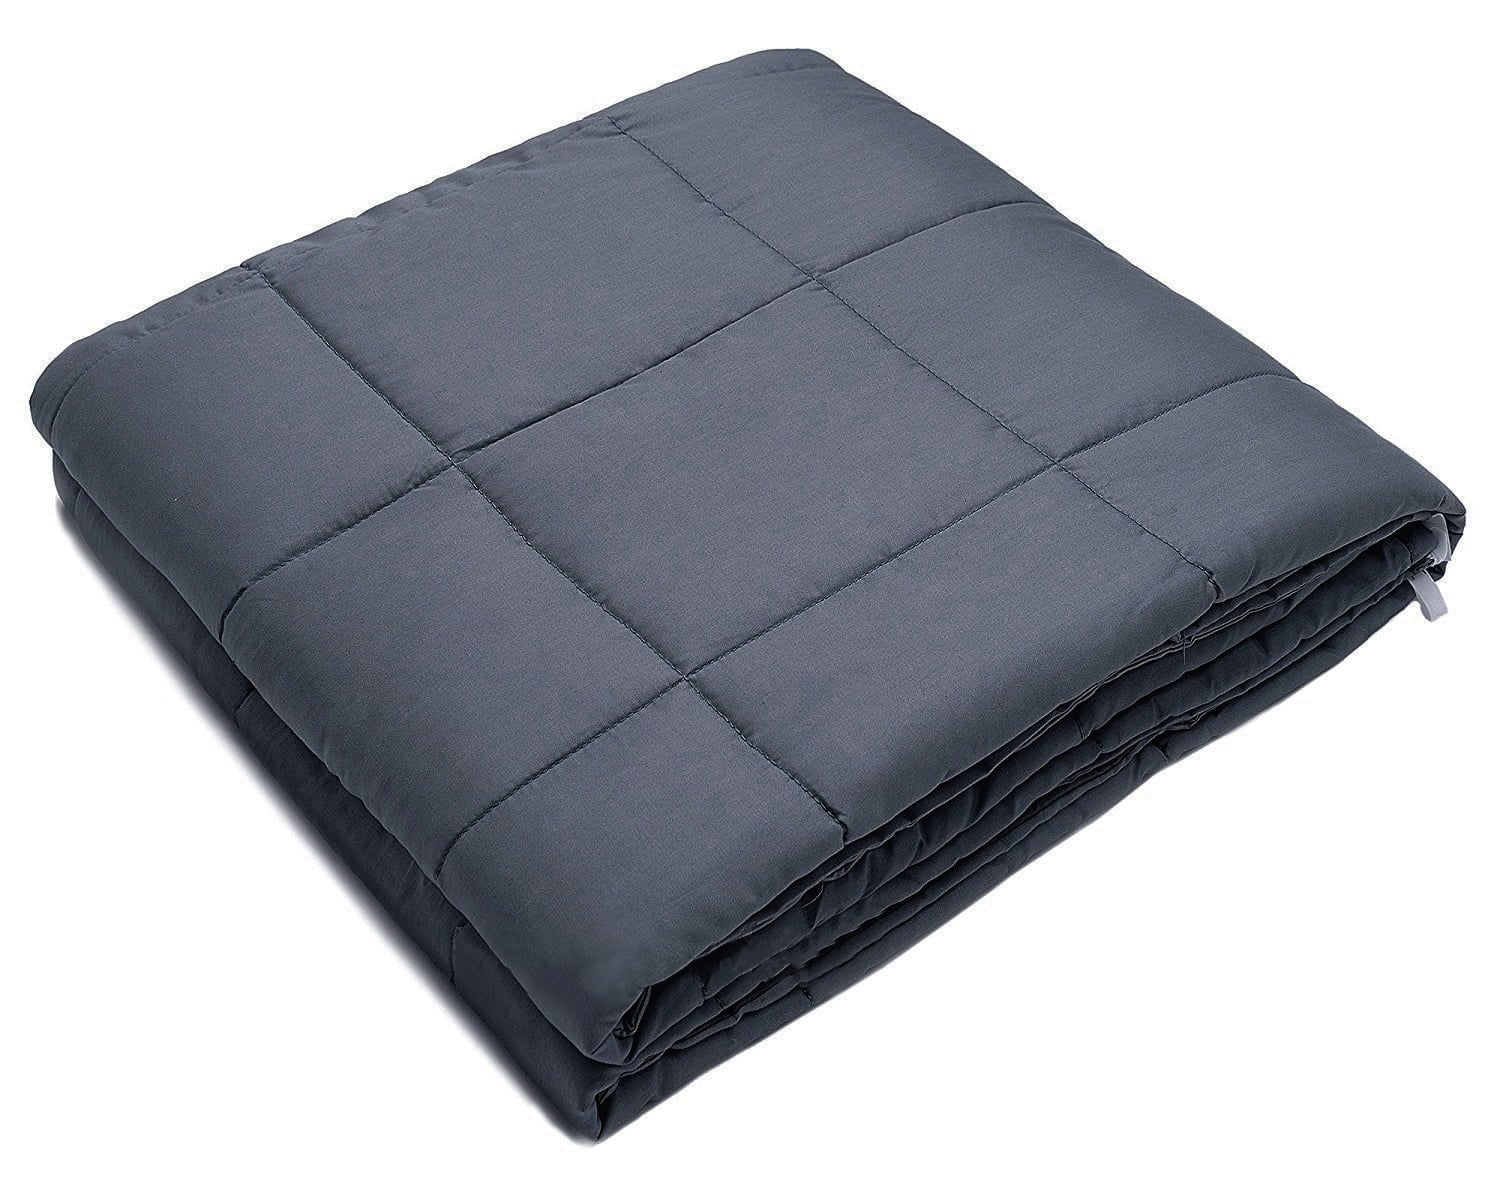 Comforday Weighted Blanket (20 lbs, 60"x 80", Queen Size) | 2.0 Heavy